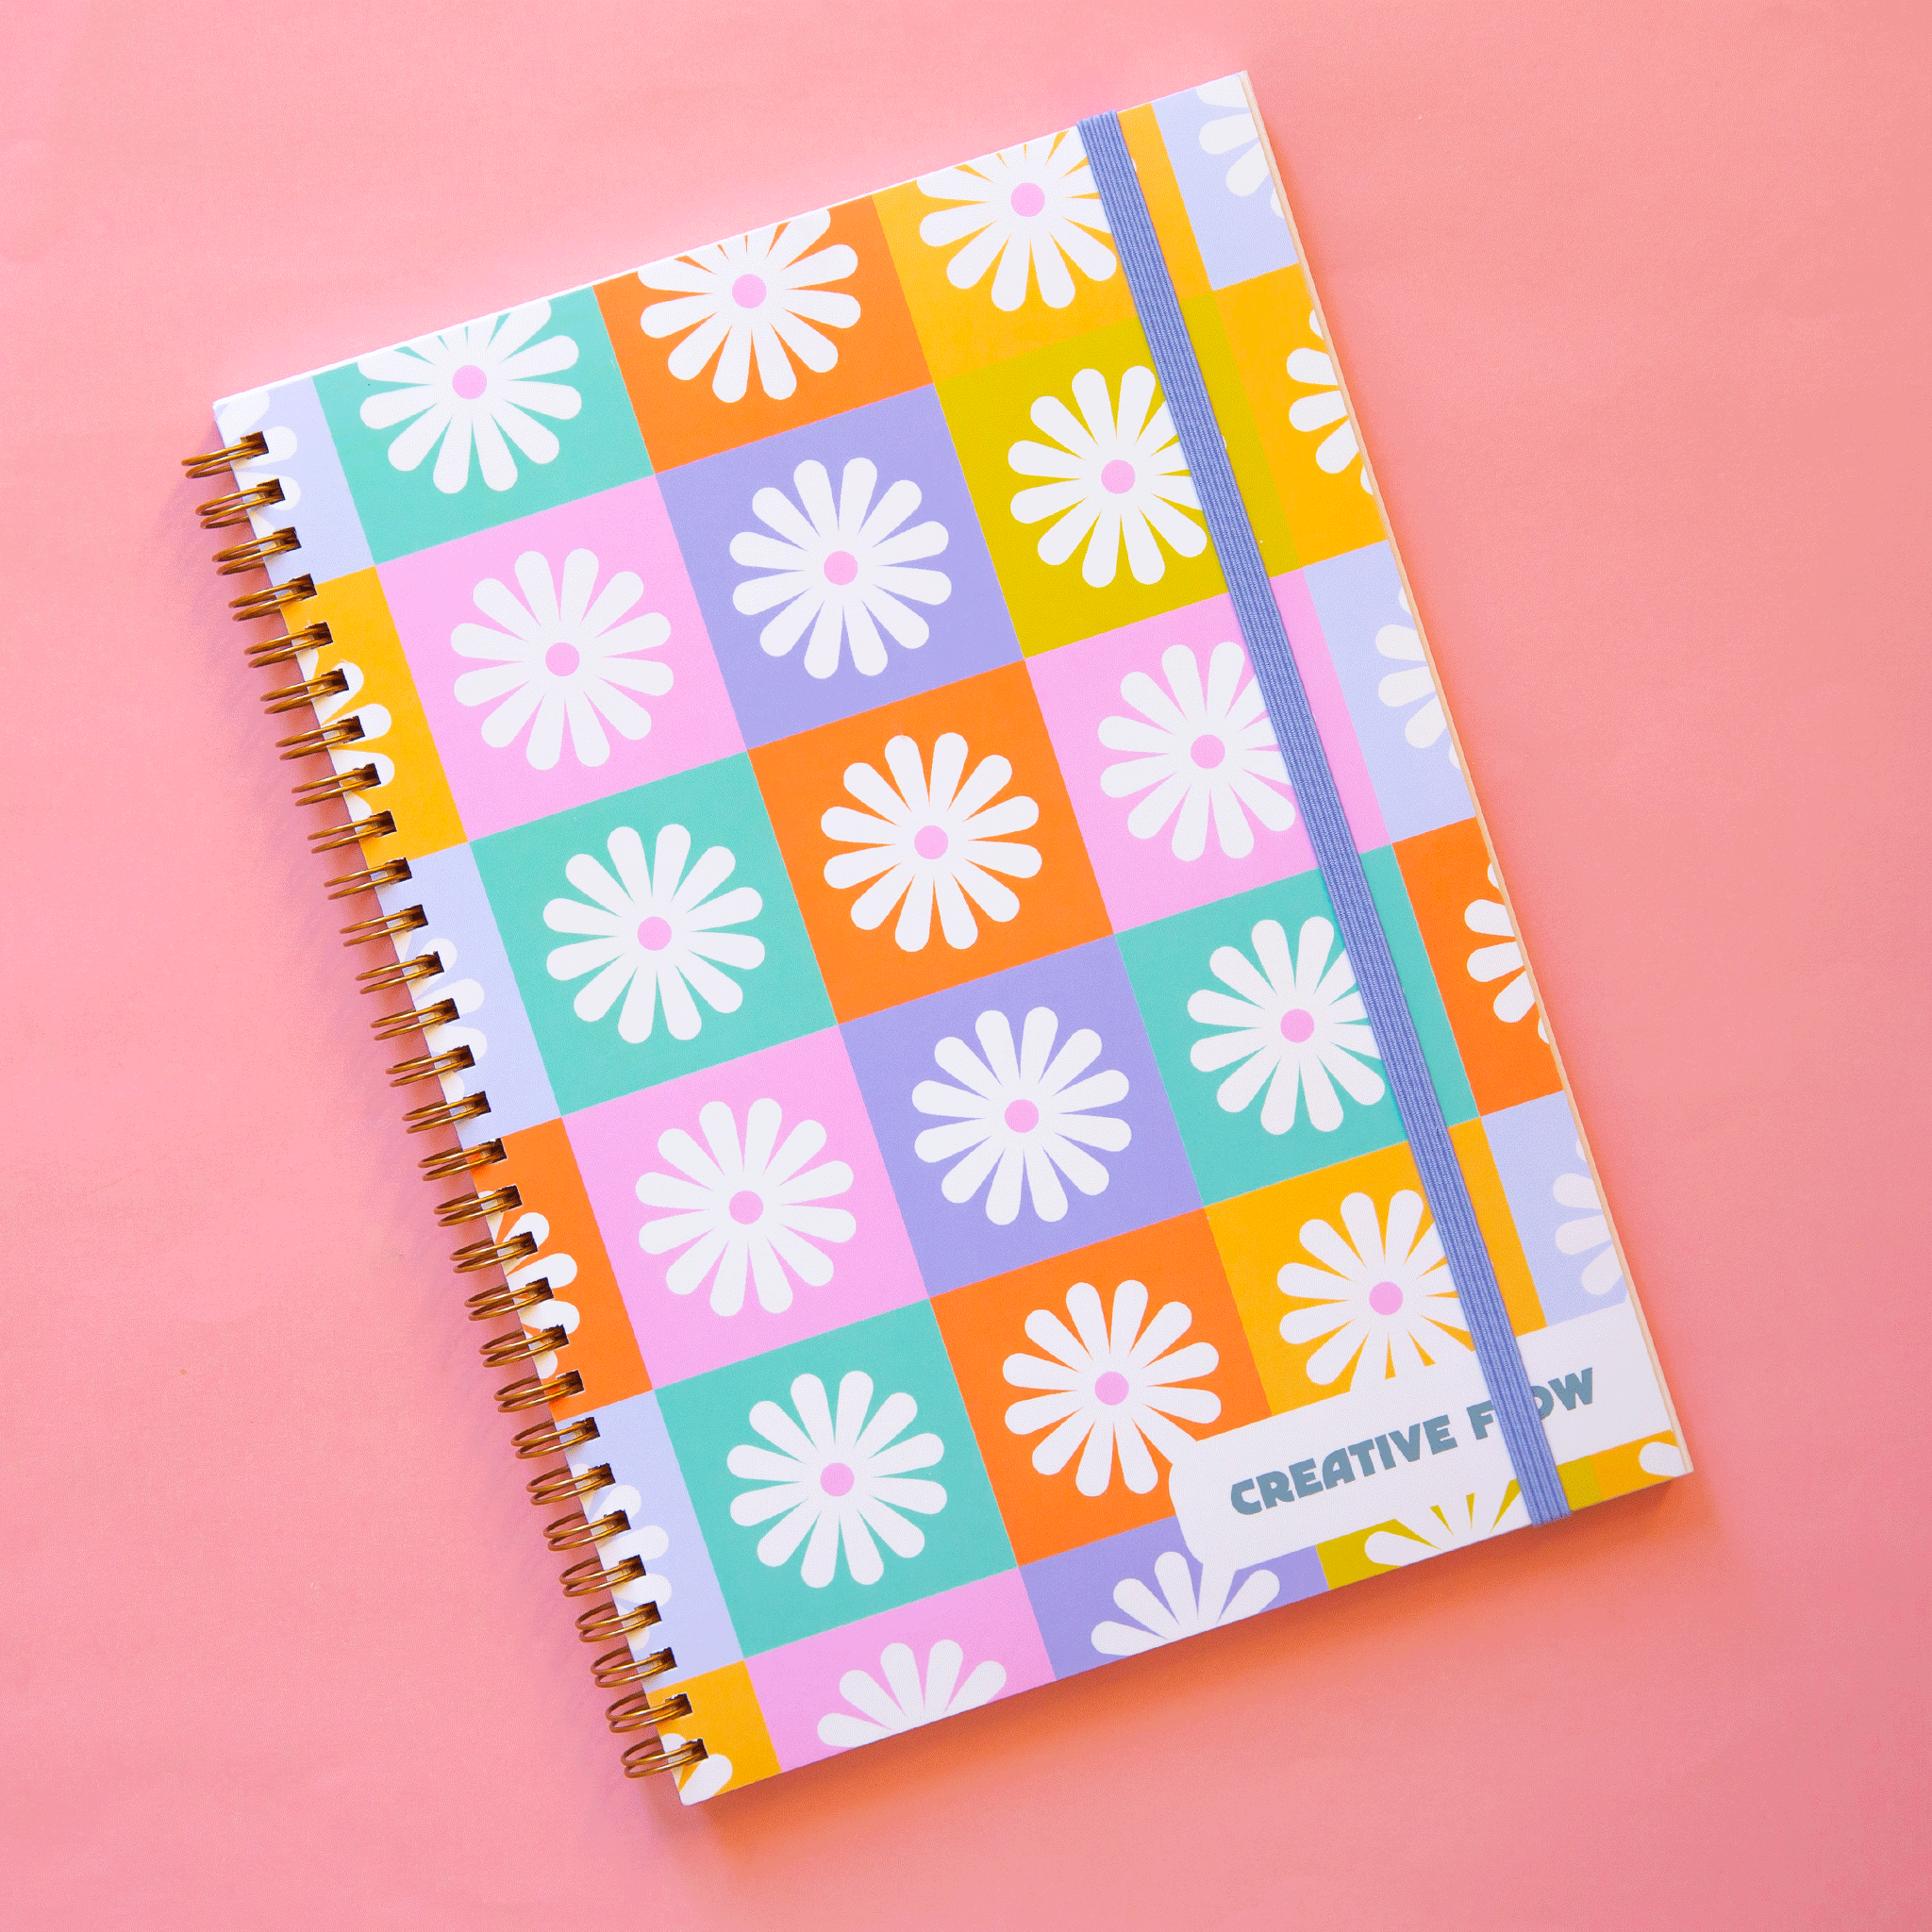  A spiral bound notebook with a multicolored checker design that has a white daisy in the center of each square. In the bottom right hand corner it says, &quot;Creative Flow&quot; in green text.